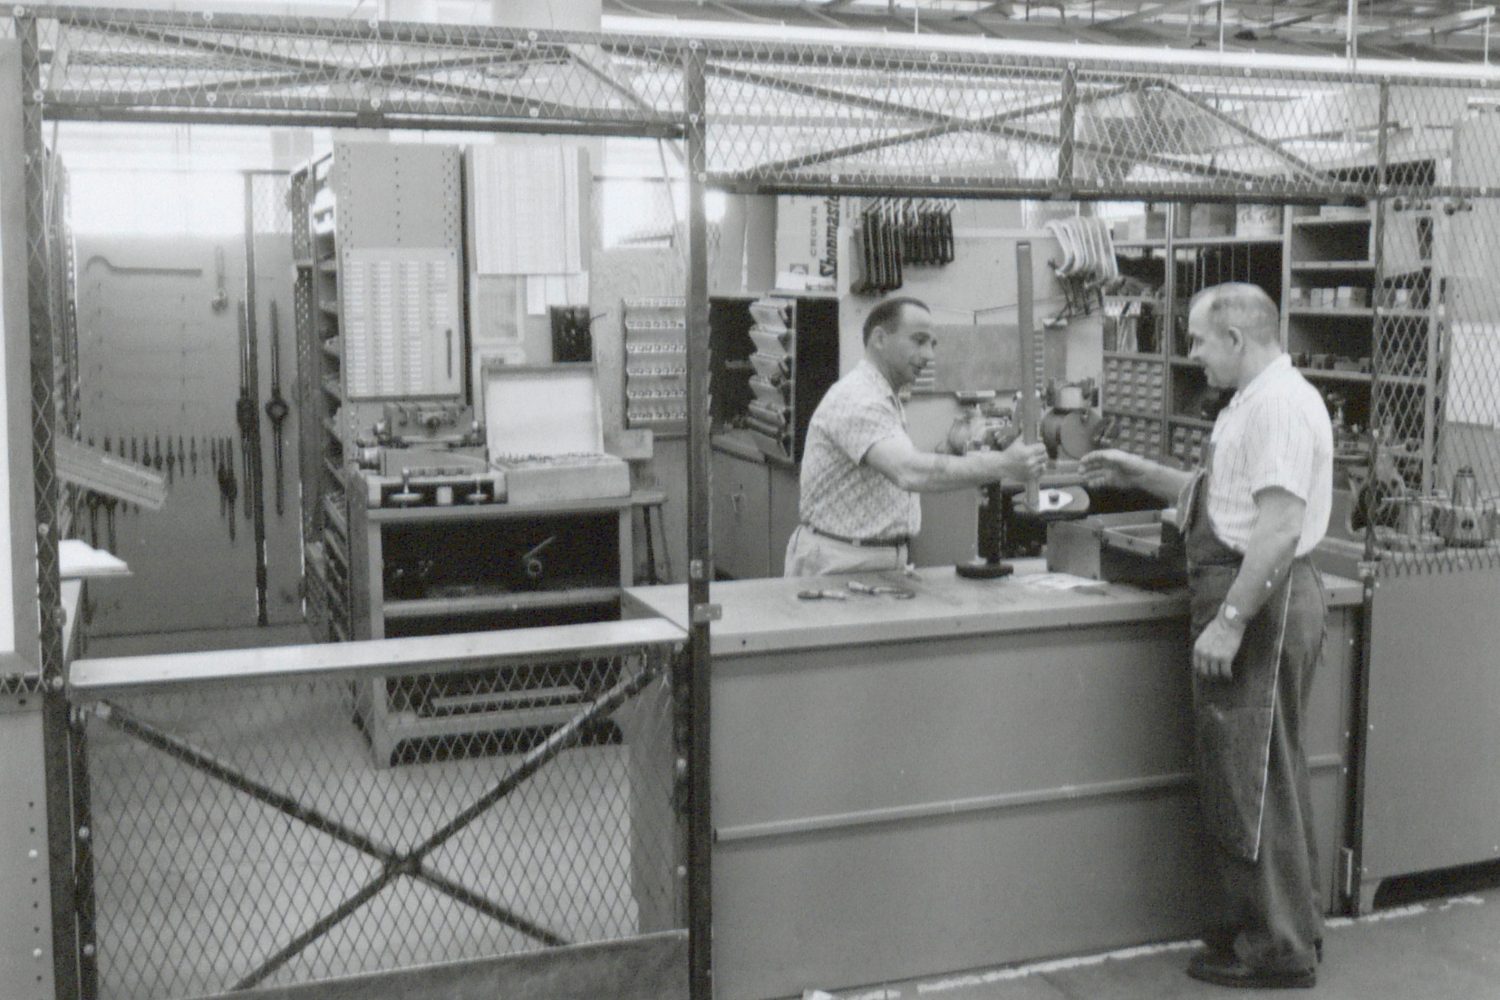 Photo of the Hewlett-Packard toolroom taken in 1961. A man behind the counter is handing a tool to an HP worker.